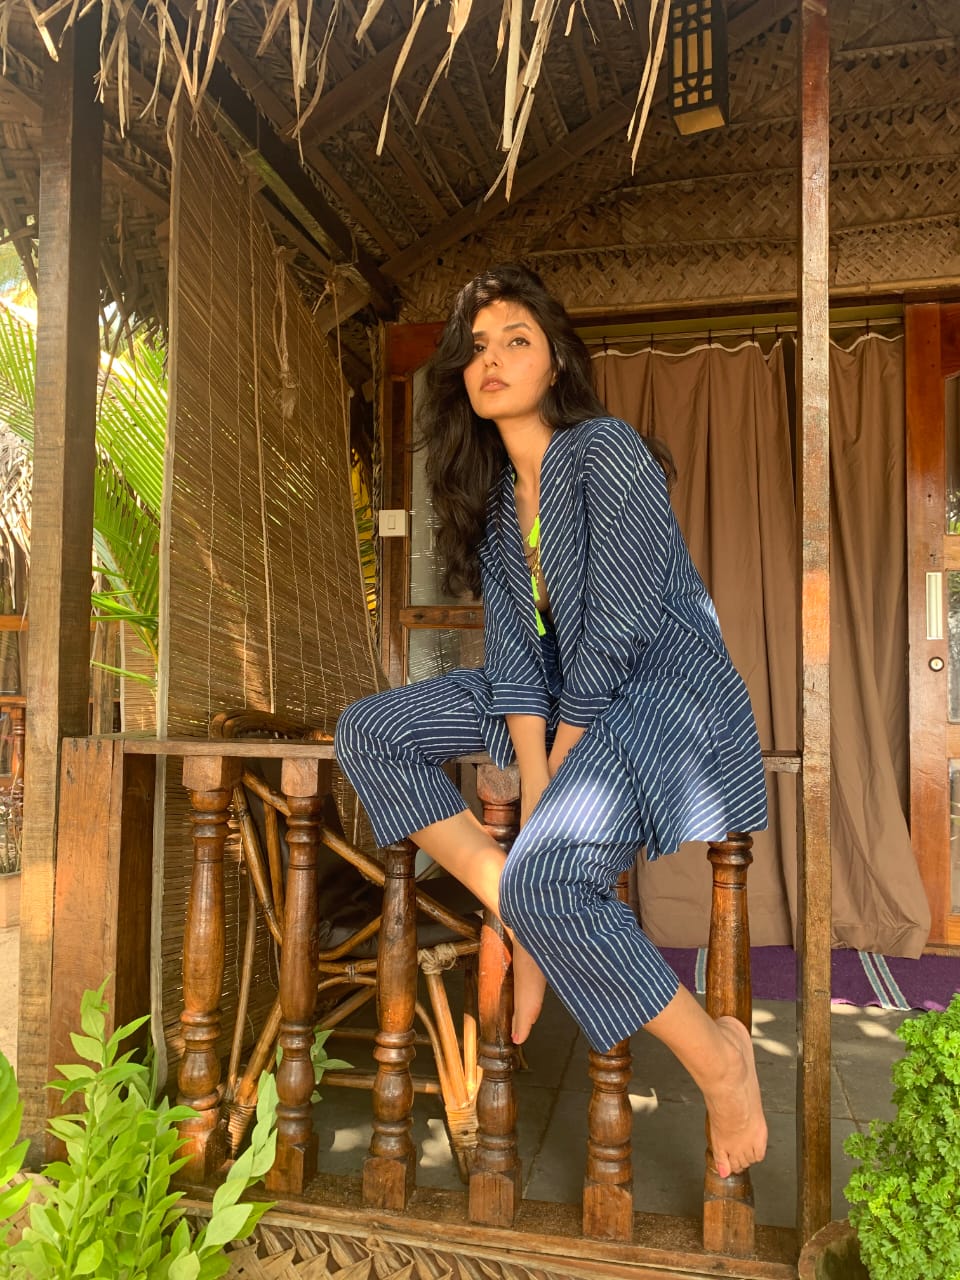  Harshita Shekhar Gaur was spotted in a striped blue trouser and a blazer set. The striped blazer set is perfect for the workplace as well as high-end brunches. The same colour trend from head to toe promises an effortlessly put-together end result.